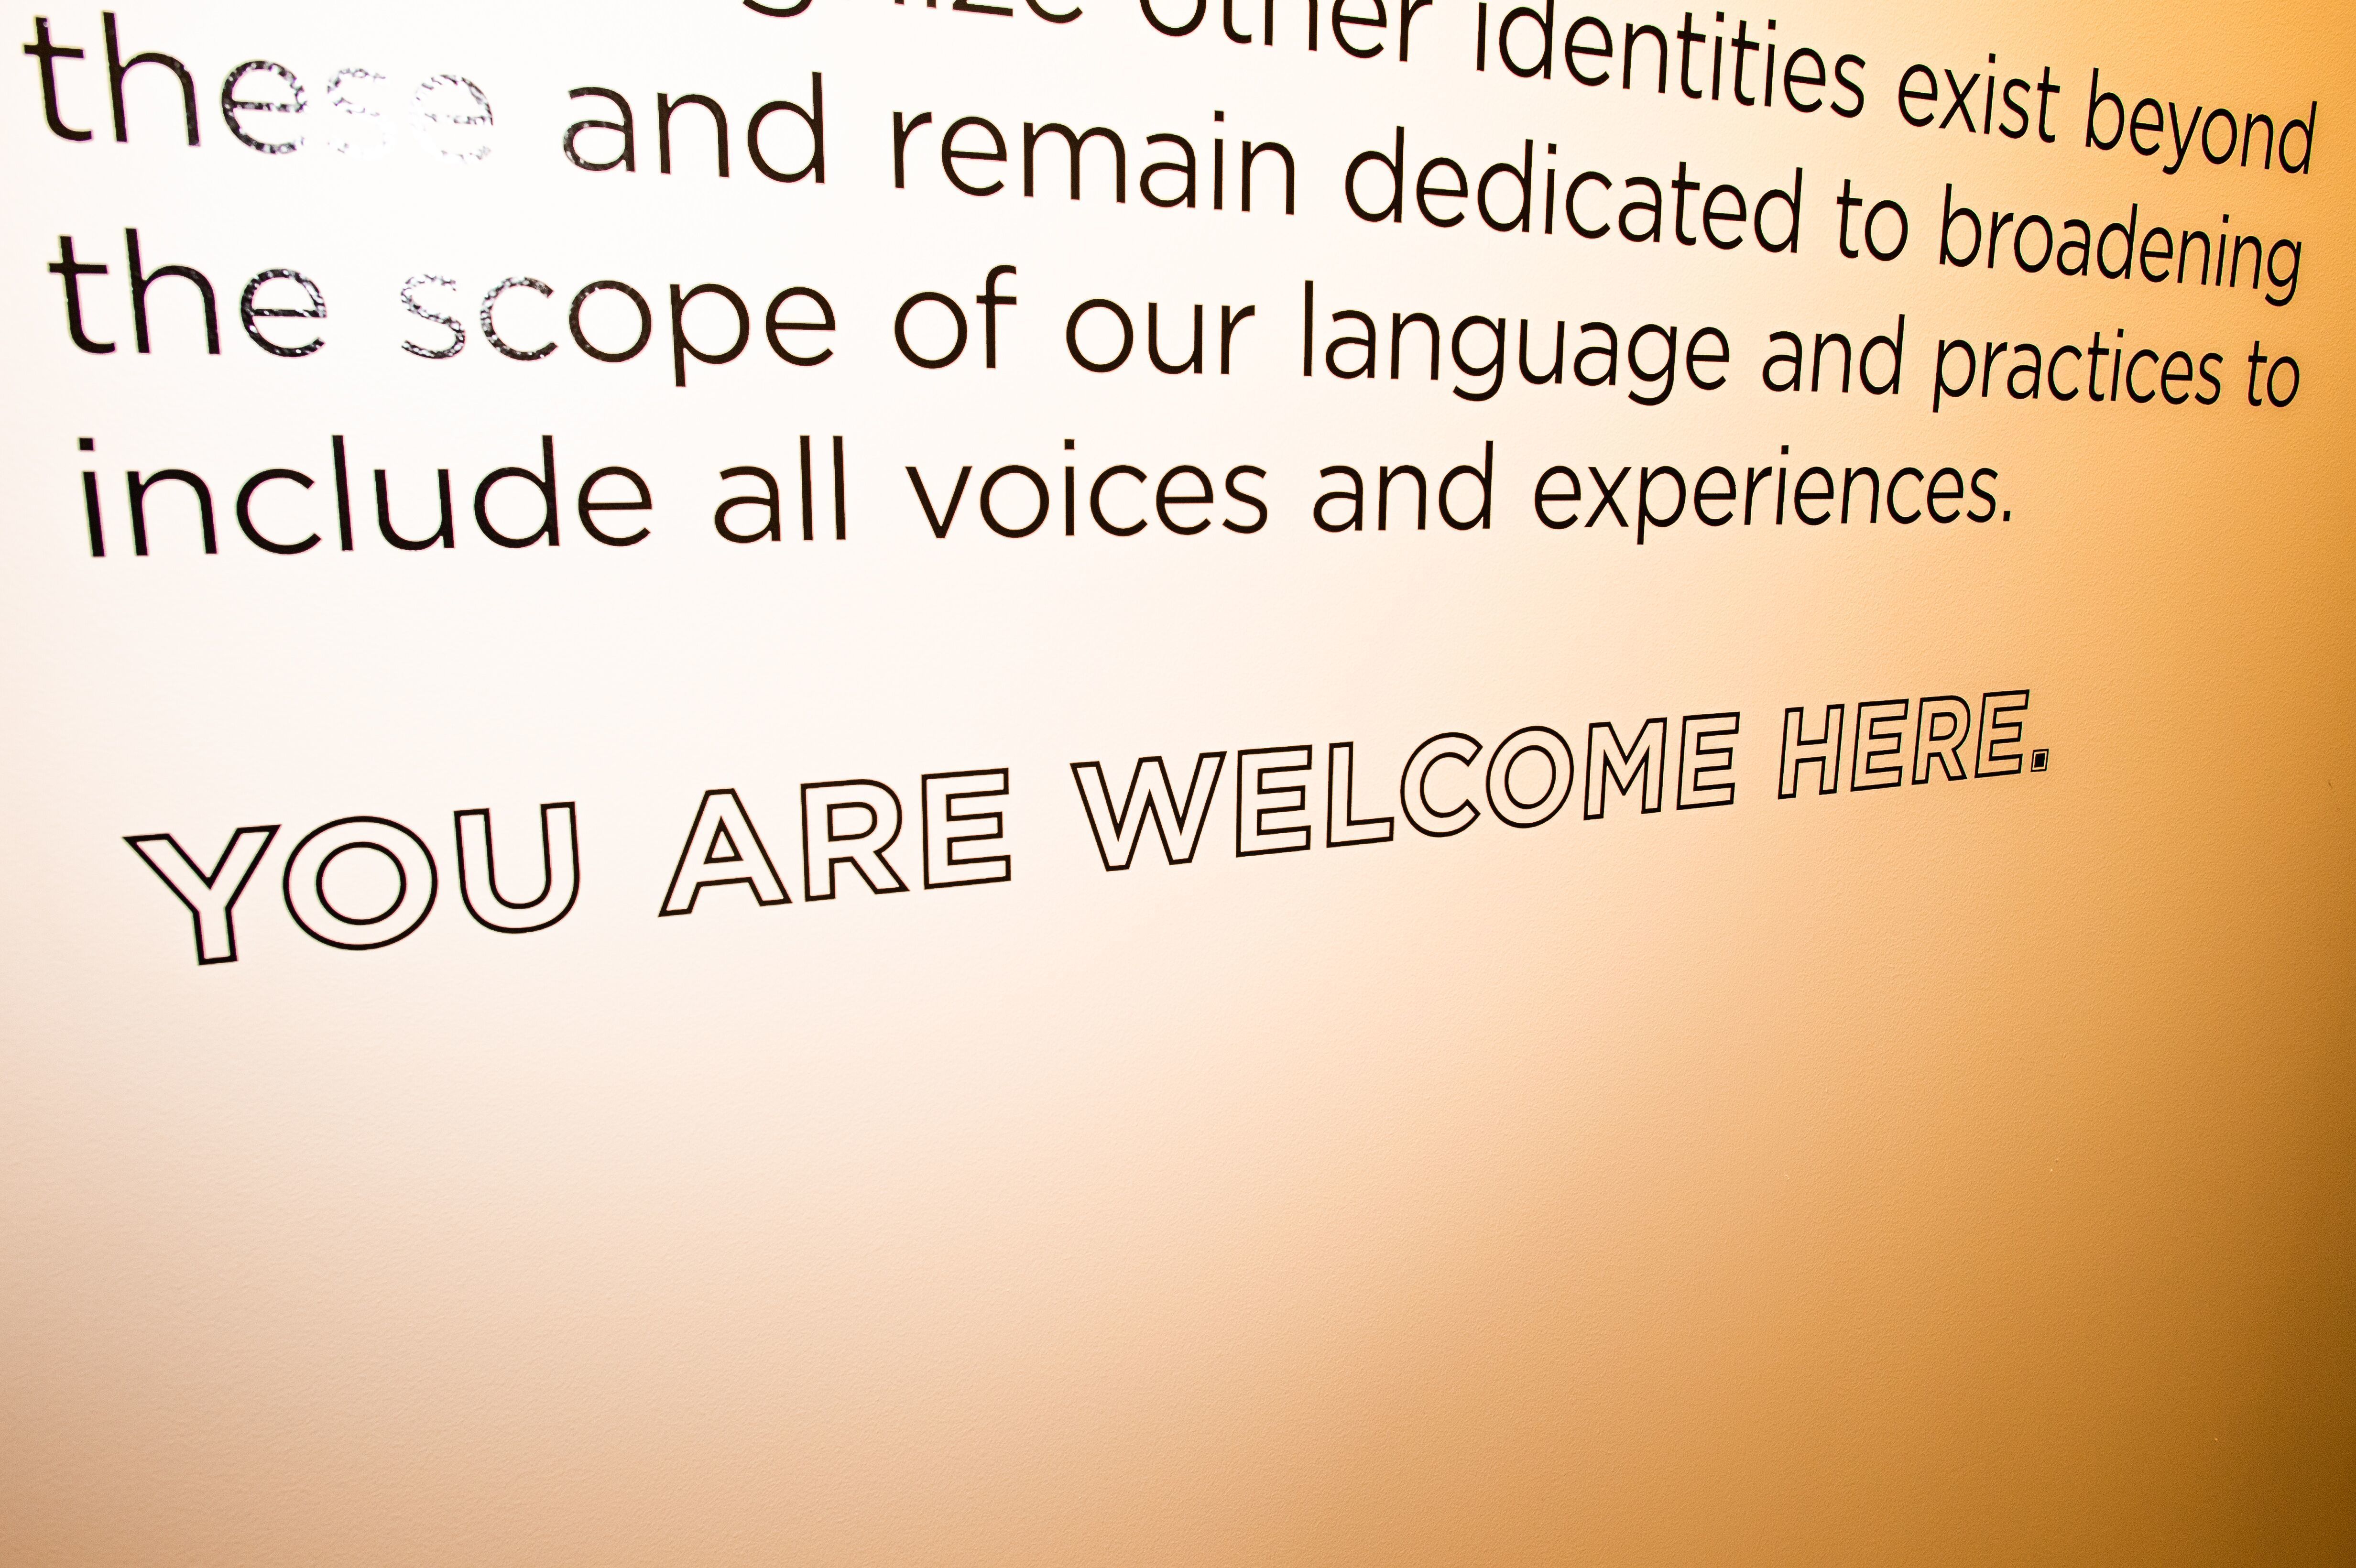 A message of inclusiveness, ending with the phrase: You are welcome here